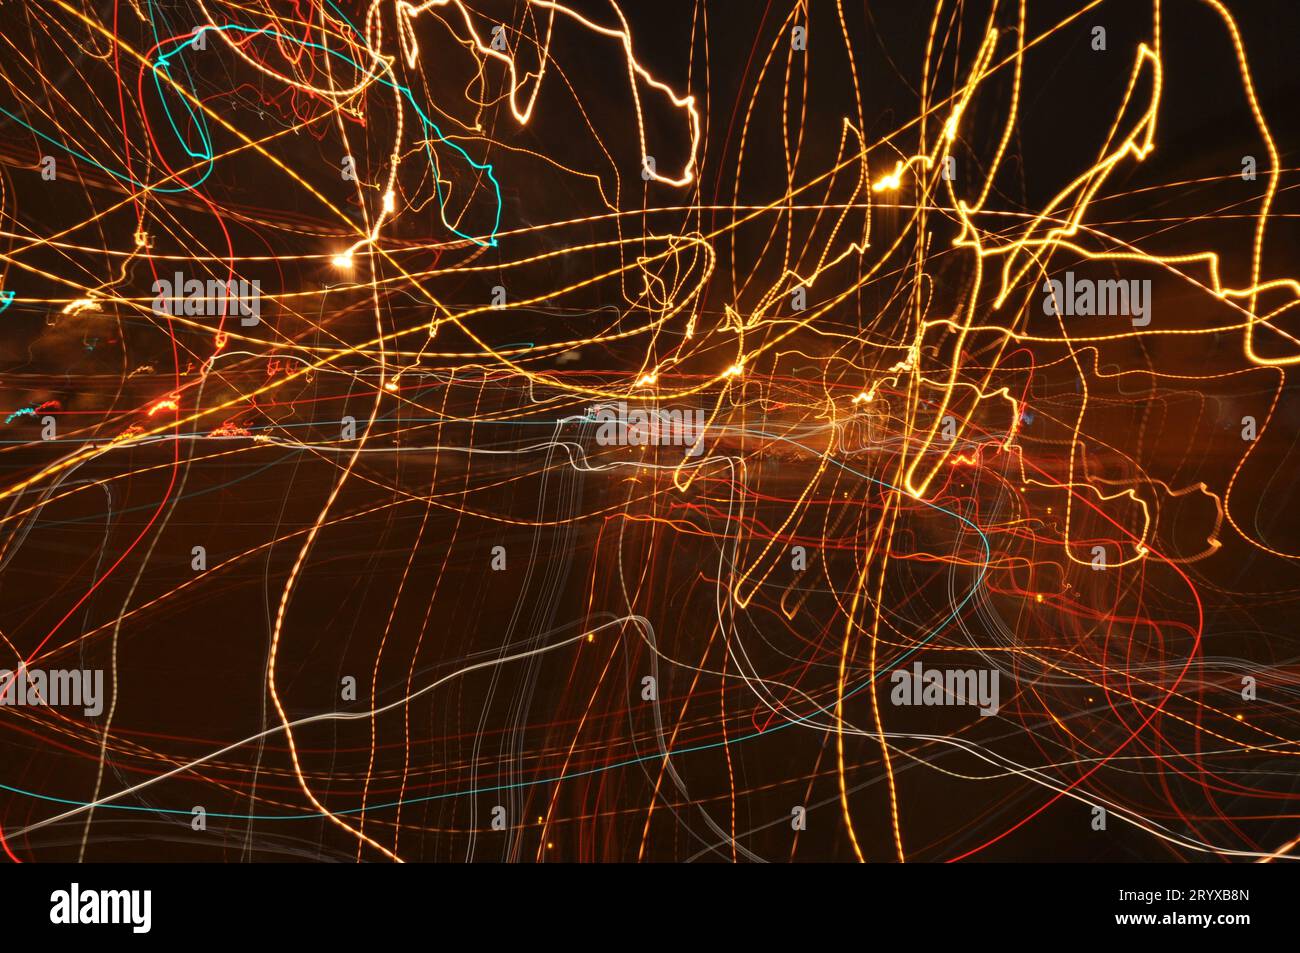 3D rendering of abstract light painting in the style of fireflies in yellow, red, green, and orange Stock Photo